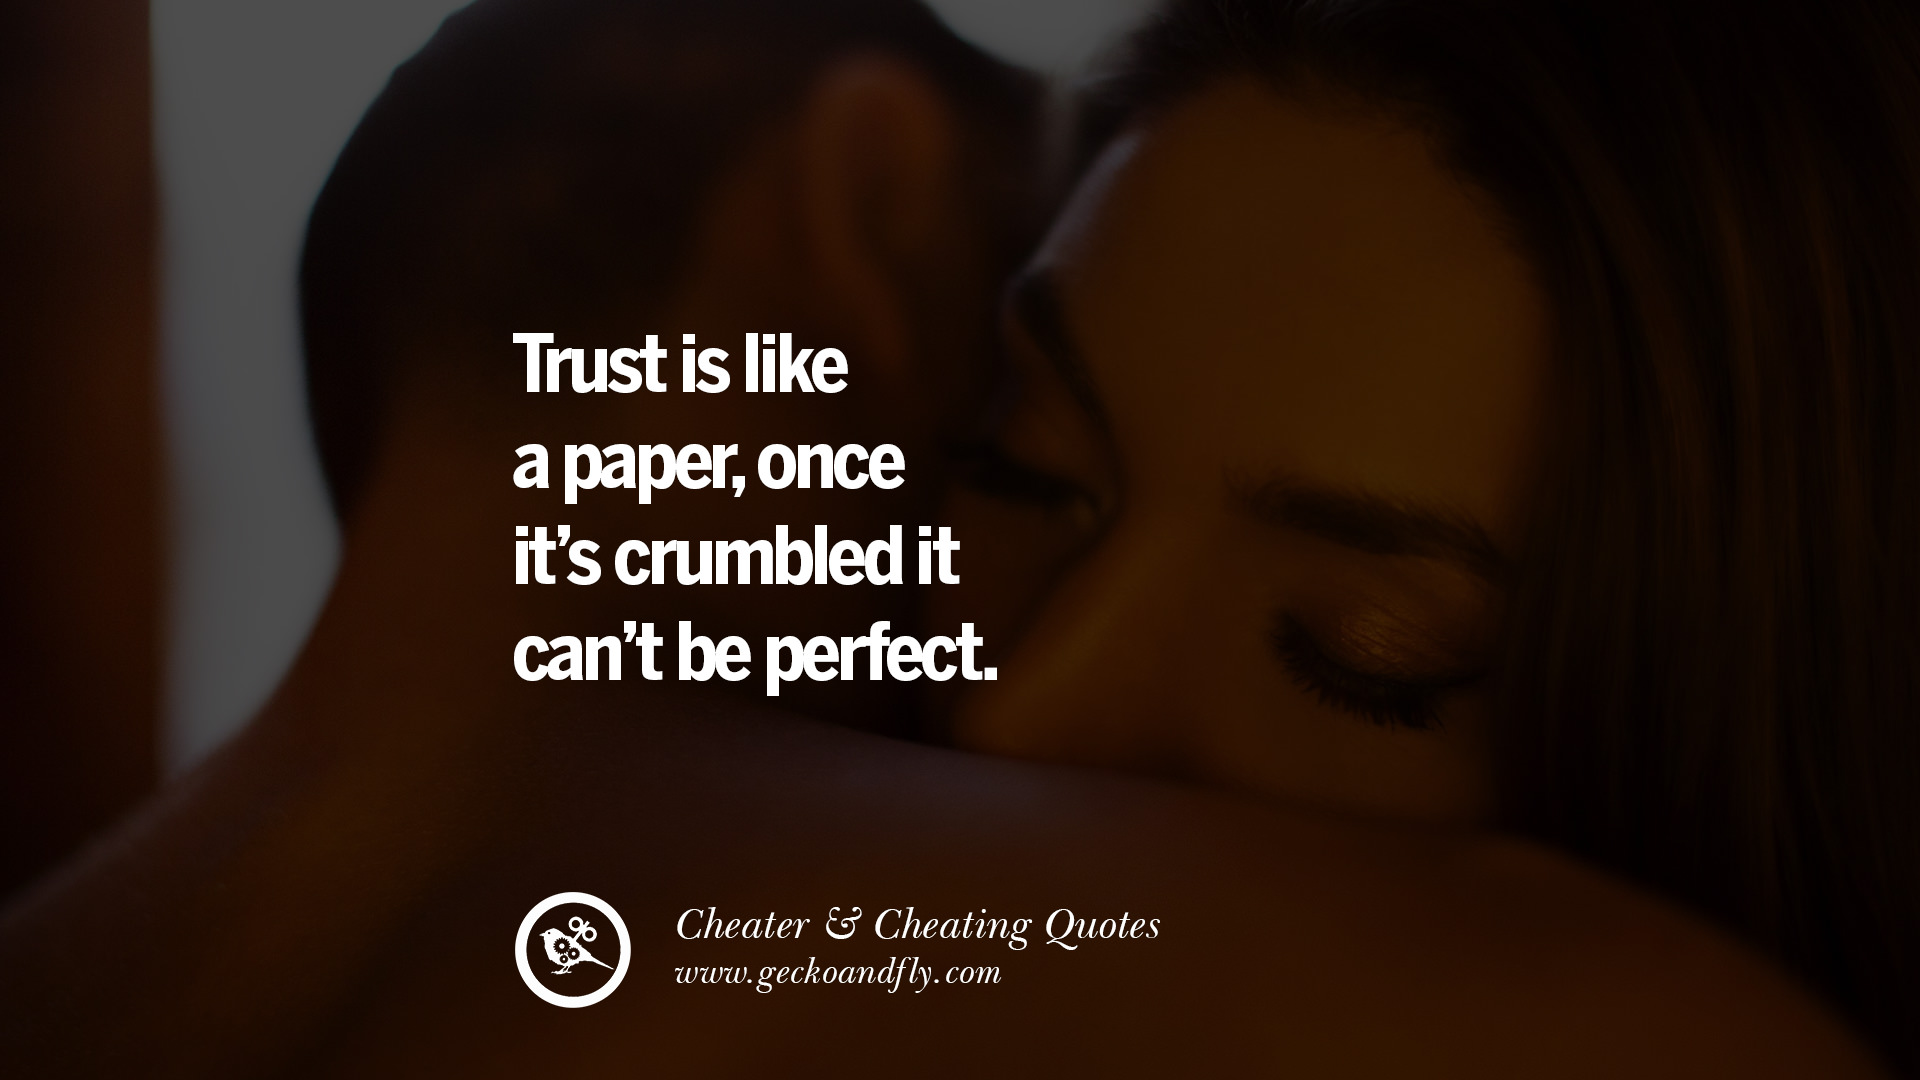 Горячие жены с переводом. Quotes about cheating. Wife Cheat quote. Trust is like a paper. Cheater wife quotes.